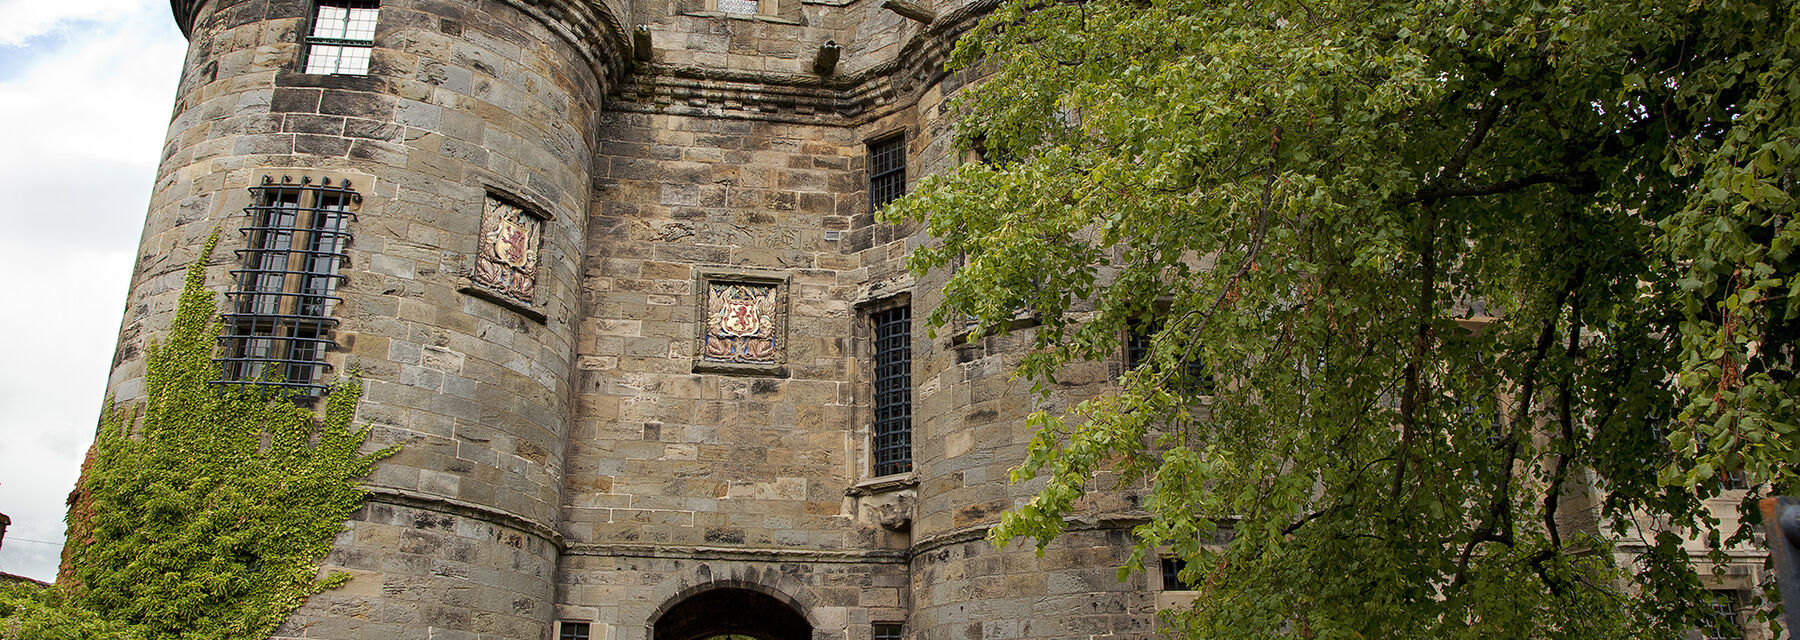 A close-up view of the entrance arch to Falkland Palace, with a round tower to the left. Large green leafy trees stand either side of the entrance path.